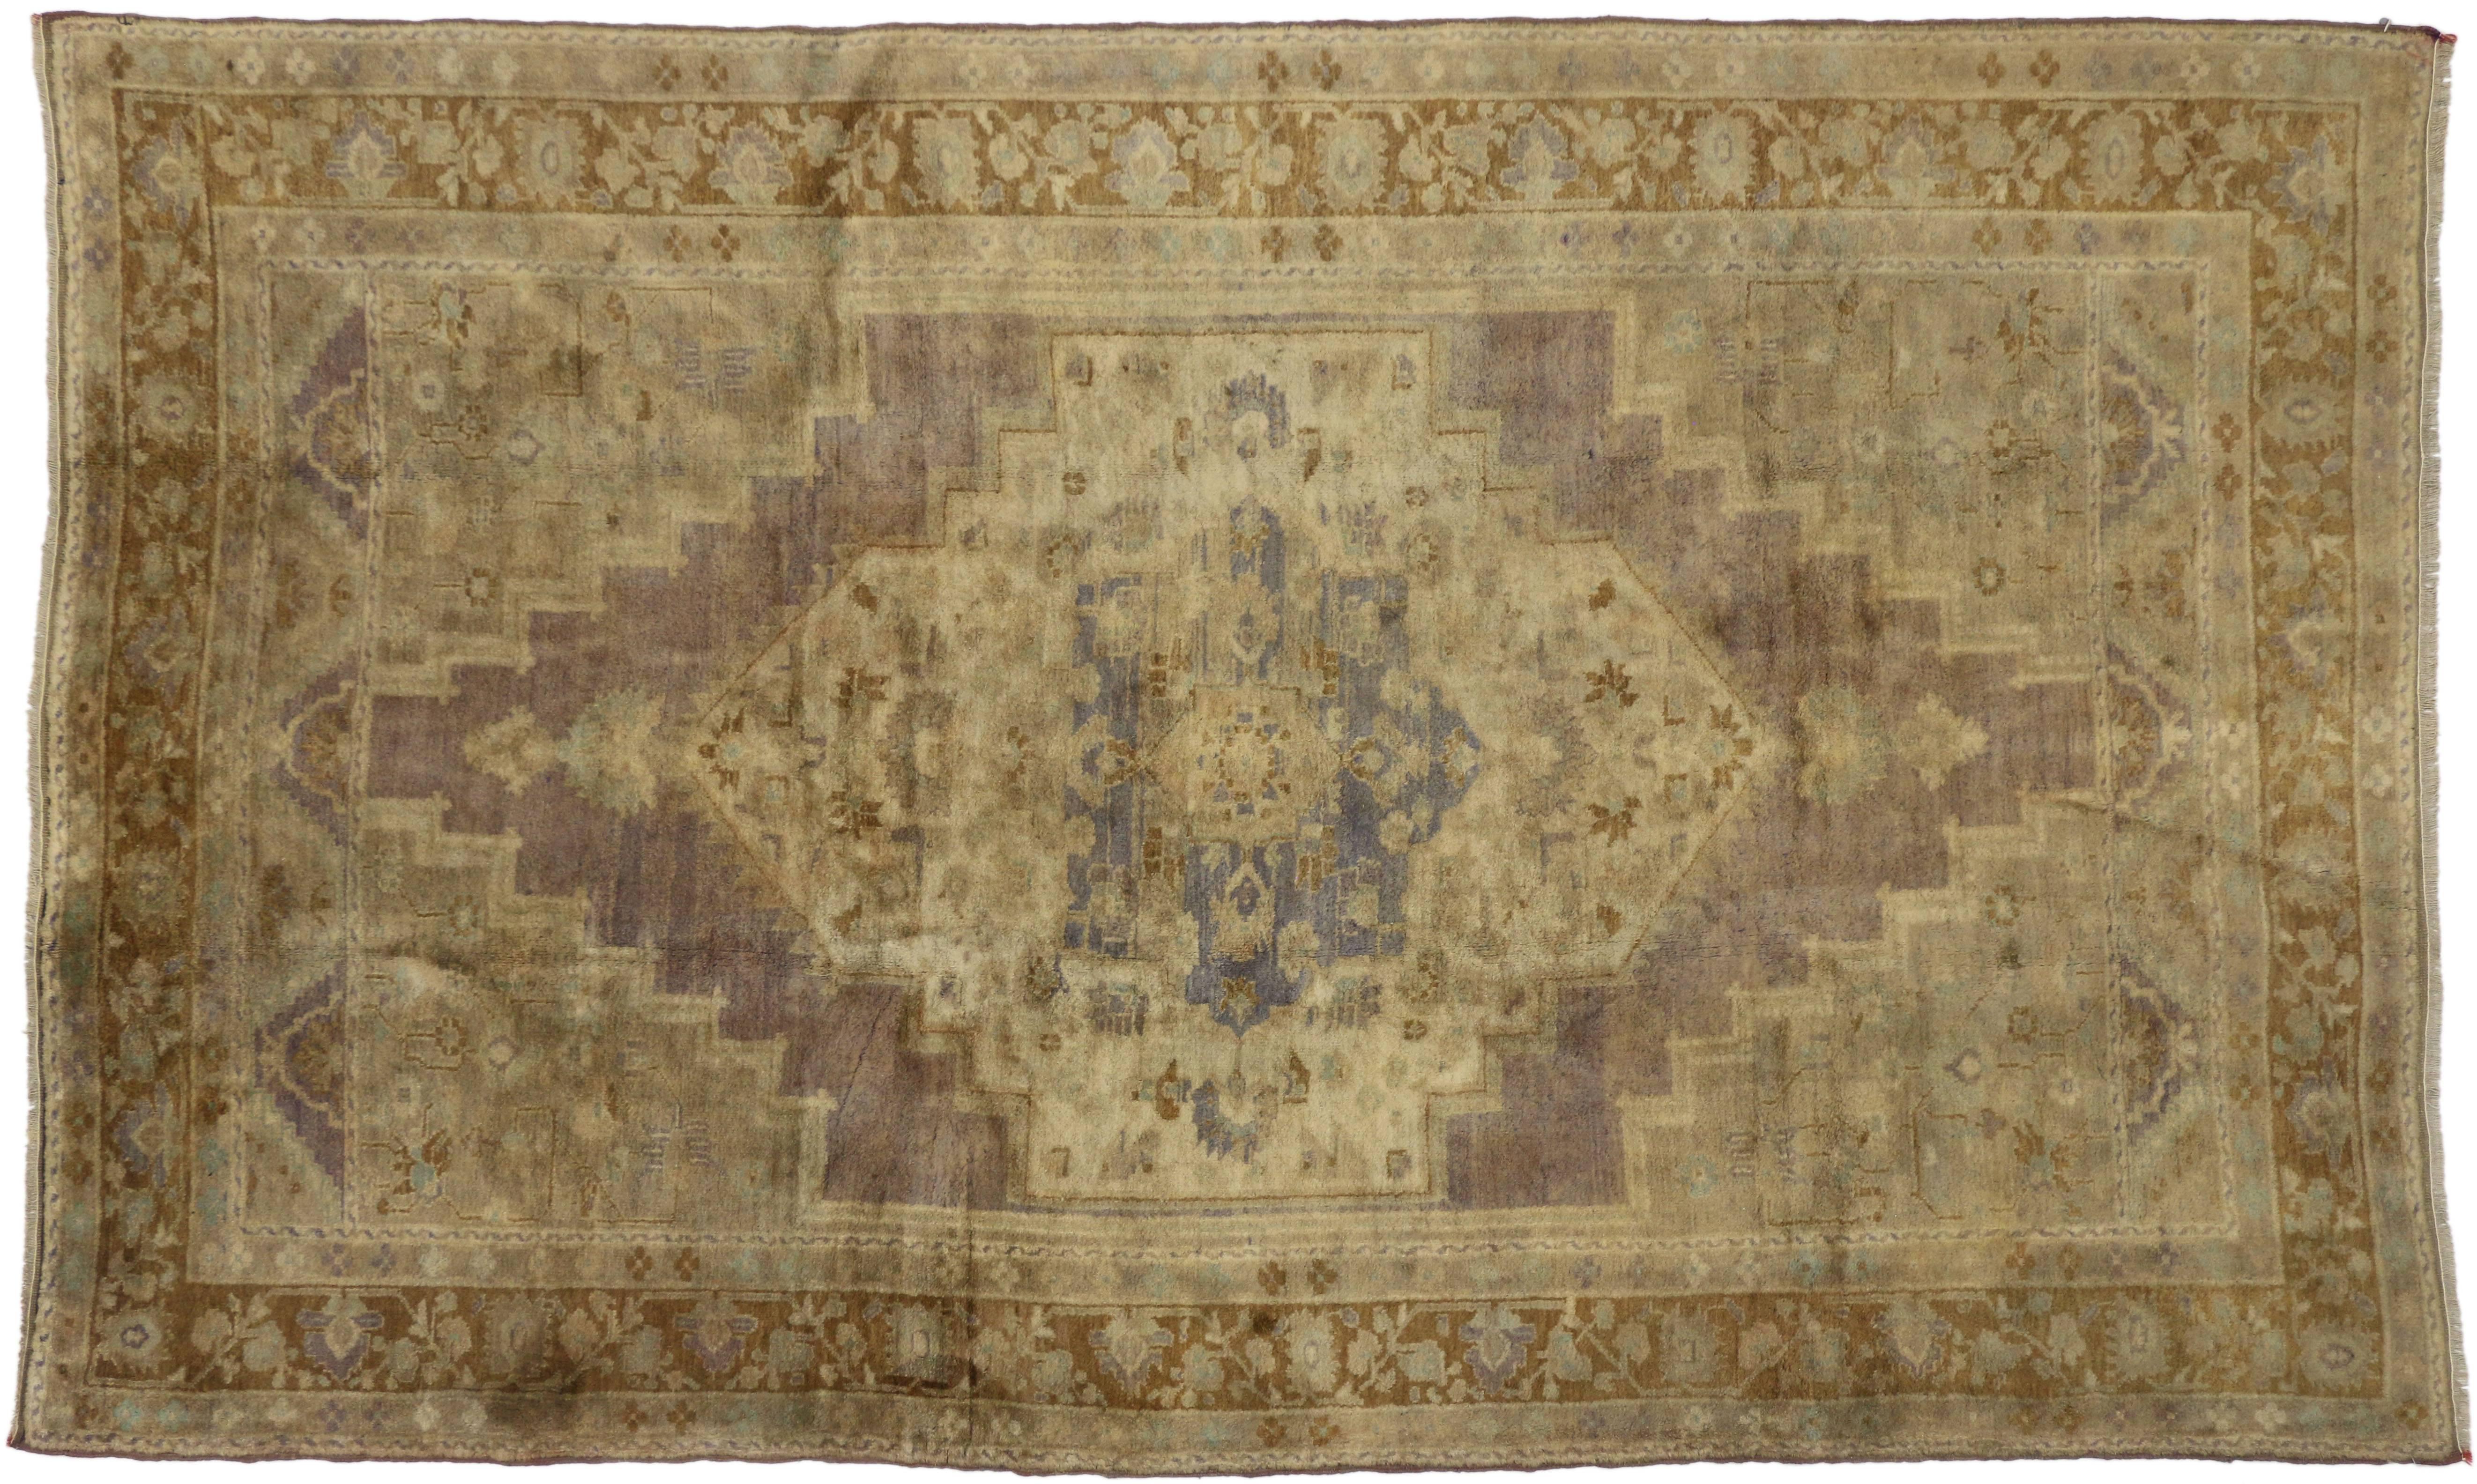 74113, a vintage Turkish Oushak in traditional style. This hand-knotted wool vintage Oushak gallery rug features a central medallion placed on a larger lozenge of faded mocha, anchored with palmettes to either end. The large lozenge is centered on a